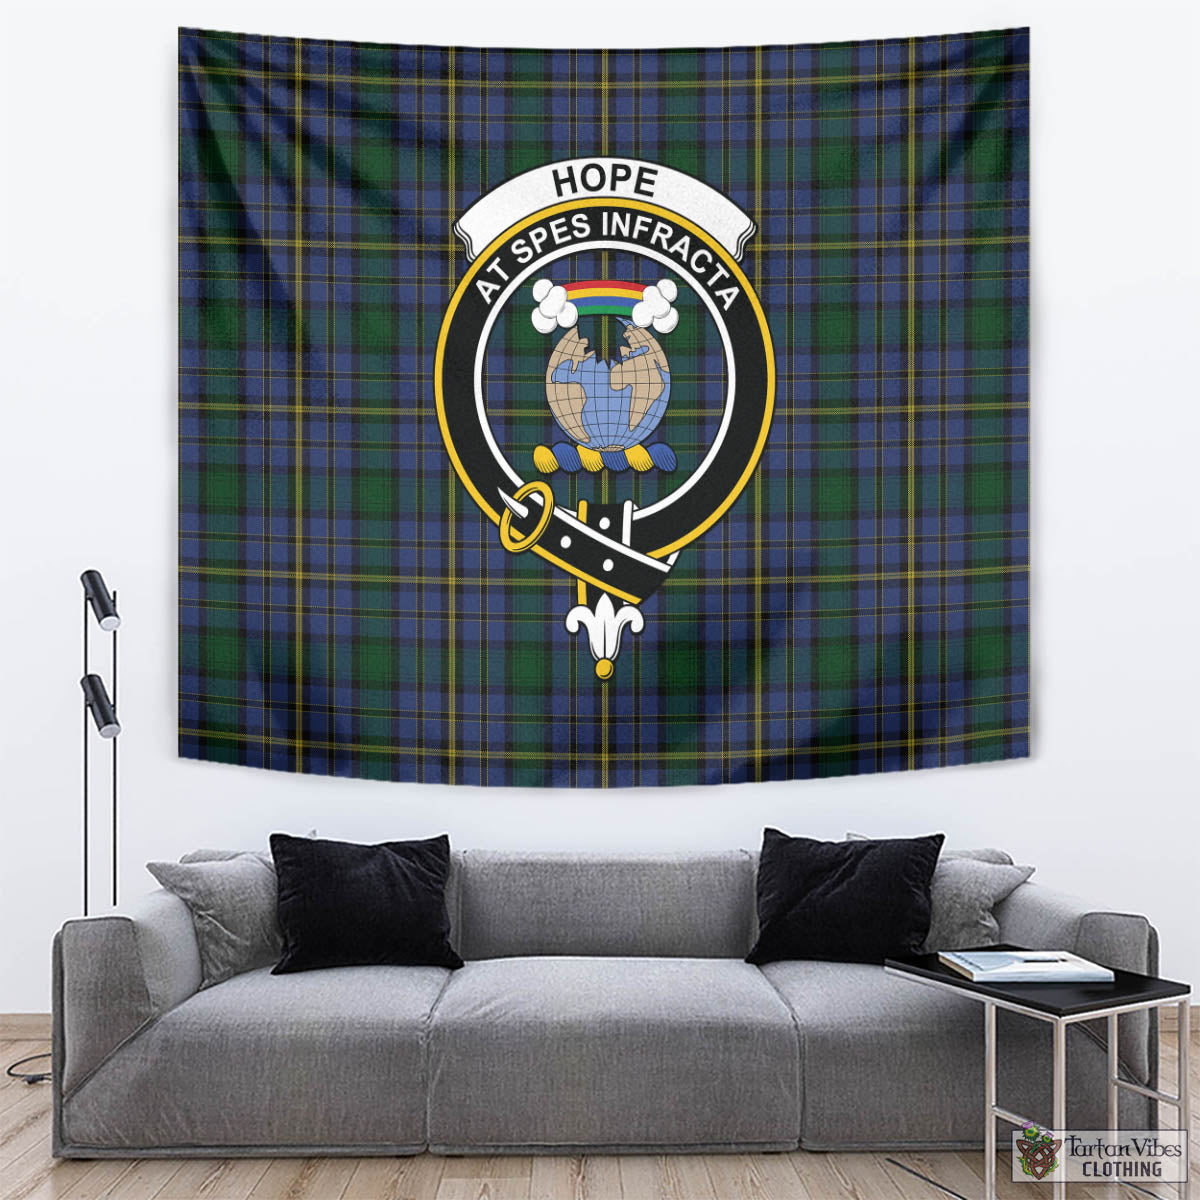 Tartan Vibes Clothing Hope Clan Originaux Tartan Tapestry Wall Hanging and Home Decor for Room with Family Crest